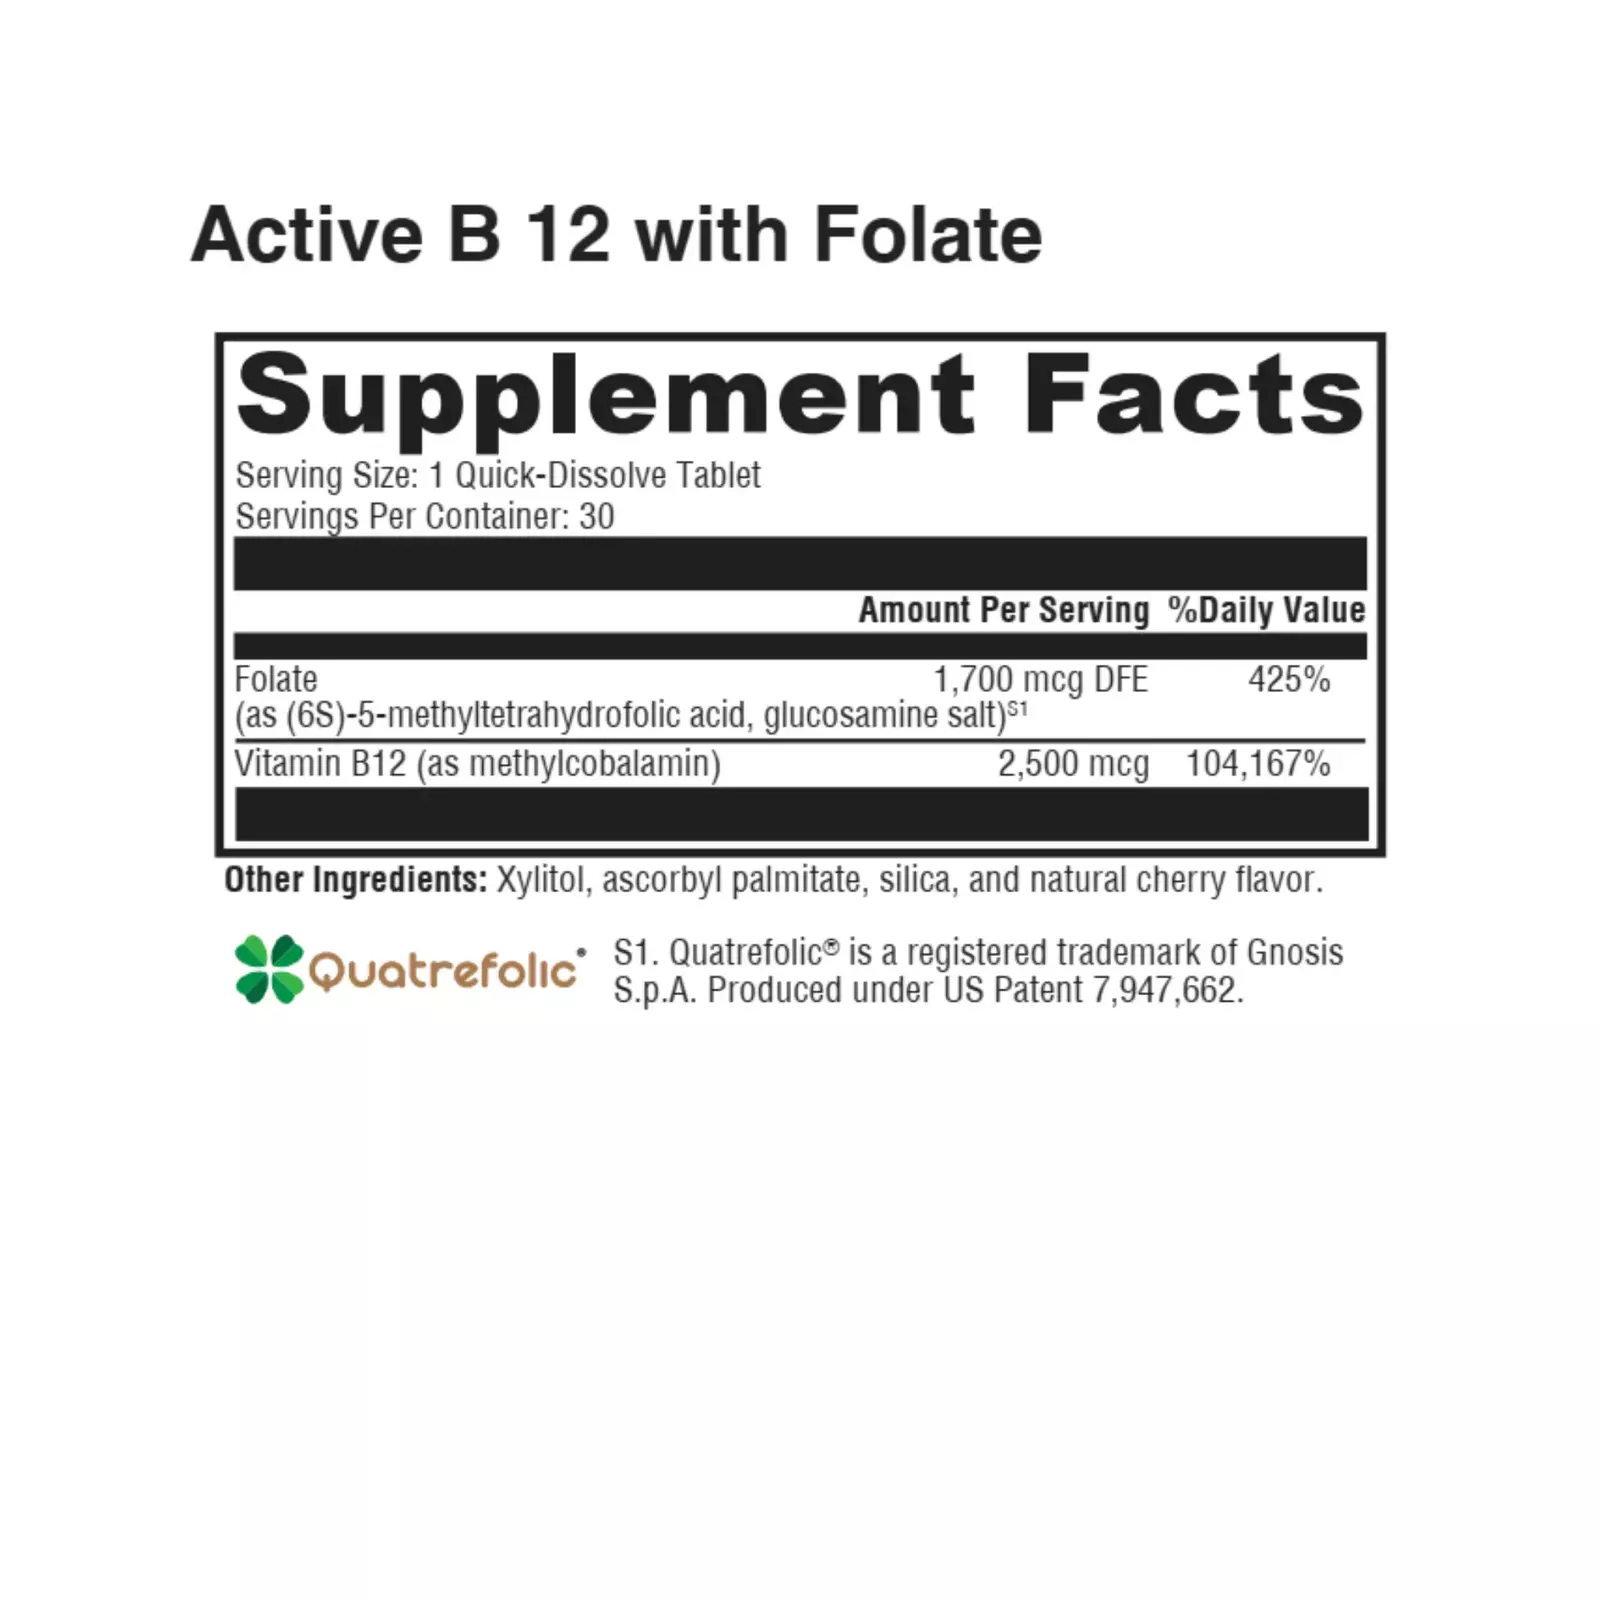 Active B12 with Folate